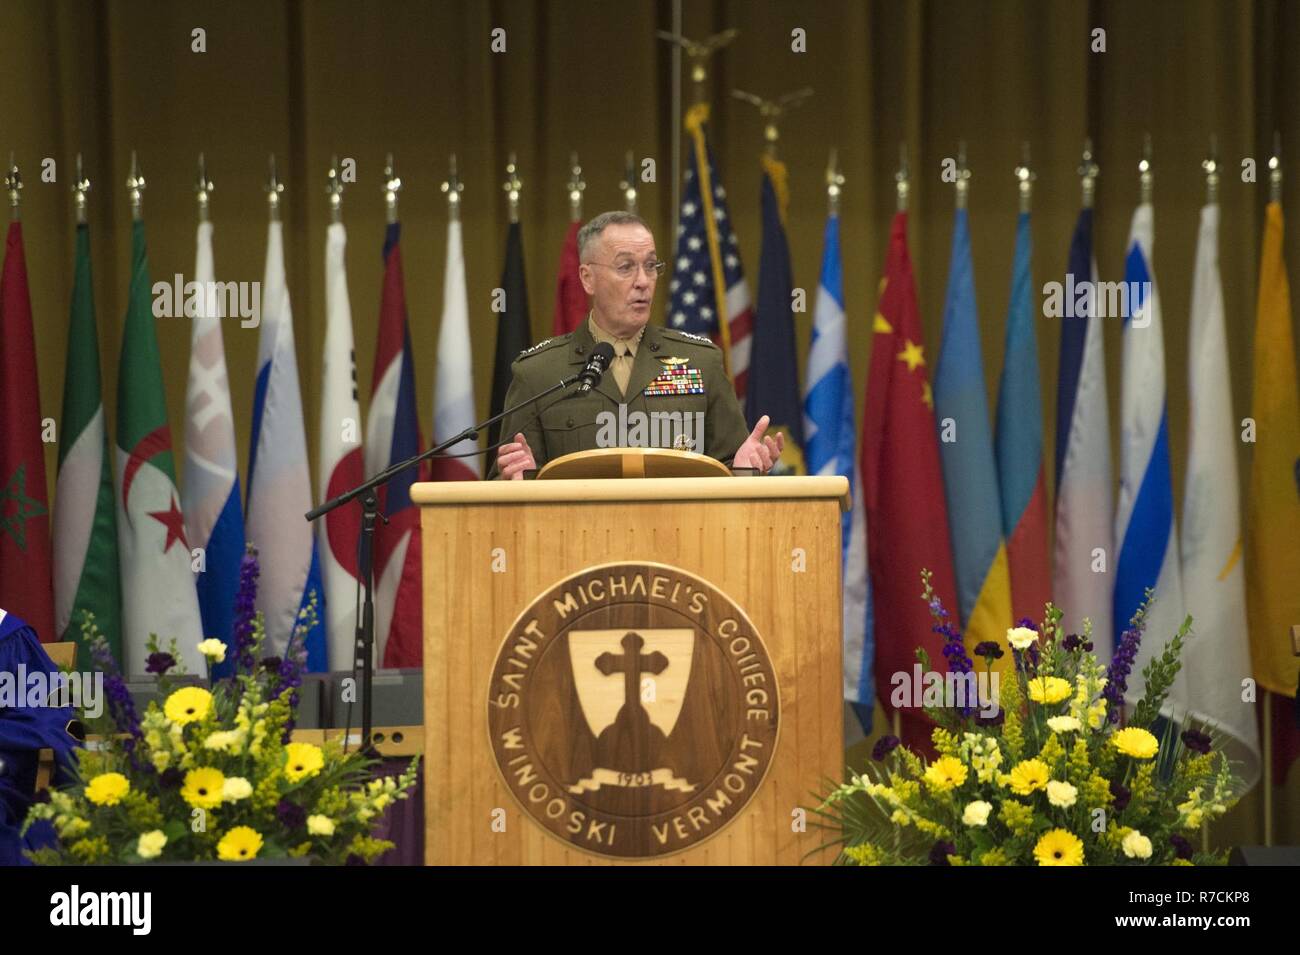 Marine Corps Gen. Joseph F. Dunford Jr., chairman of the Joint Chiefs of Staff, addresses graduates of the Saint Michael's College class of 2017 during the school's 110th Commencement in Colchester, Vt. May 14, 2017. Dunford graduated from Saint Michaels College in 1977 and has maintained close ties with the college over the years. (Dept. of Defense Stock Photo